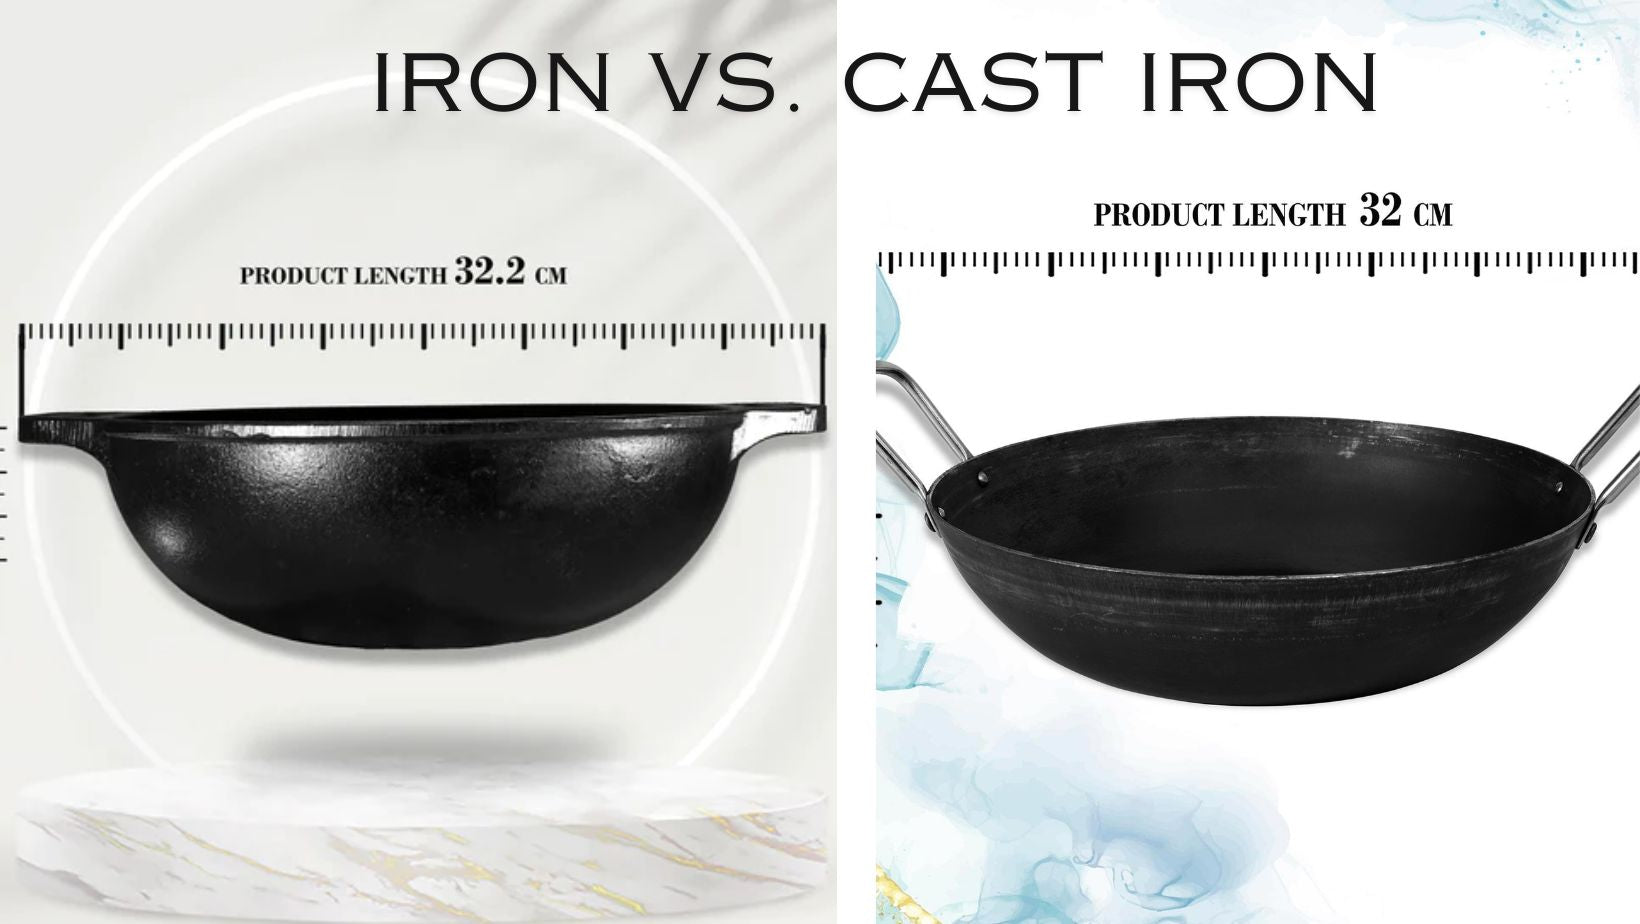 Iron vs. Cast Iron Kitchenware - Differences, Benefits, and Uses